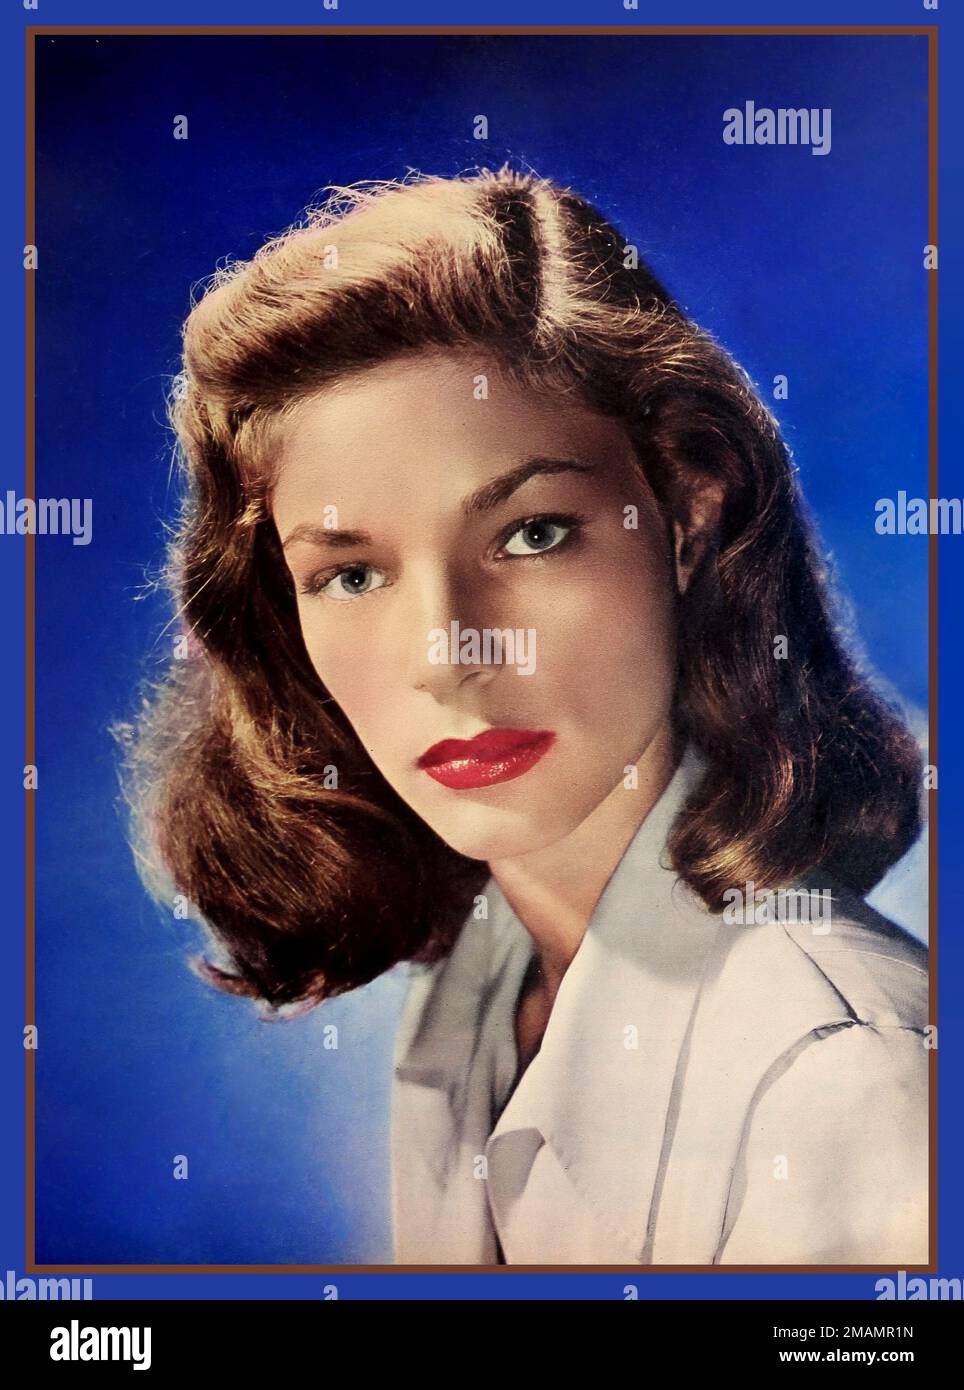 Lauren Bacall in 1946. Hollywood Publicity Still Studio Portrait photograph by Willinger March 1946 Modern Screen Magazine Hollywood USA Stock Photo